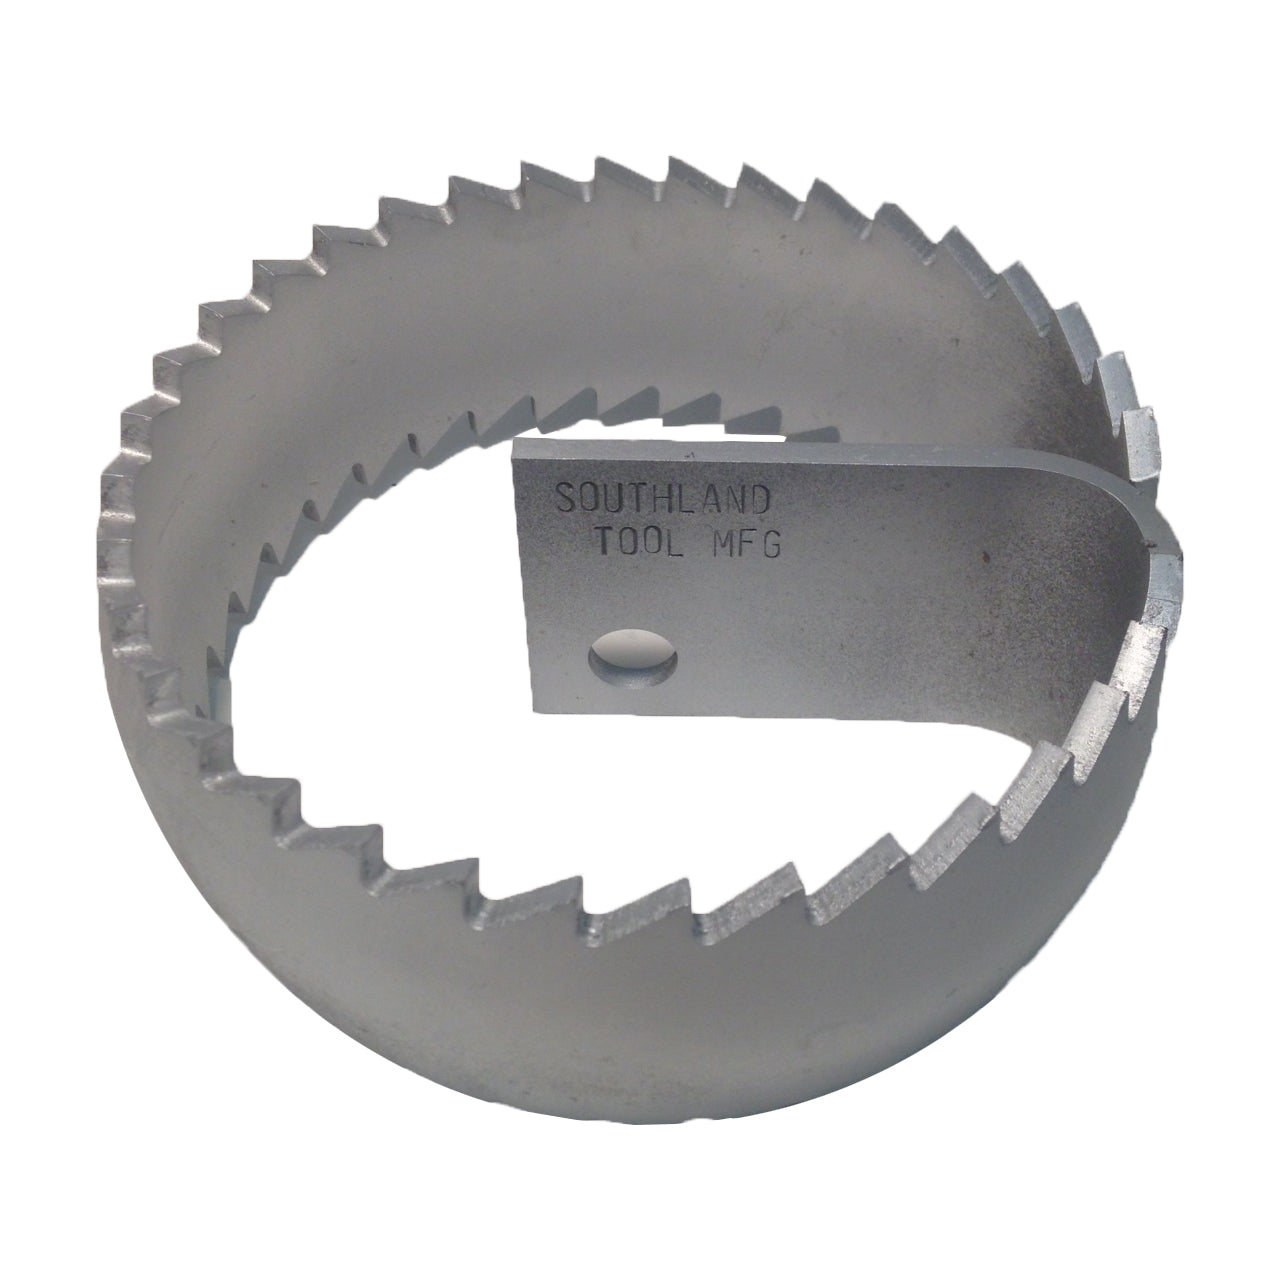 Heavy Duty Concave Root Saw Blade